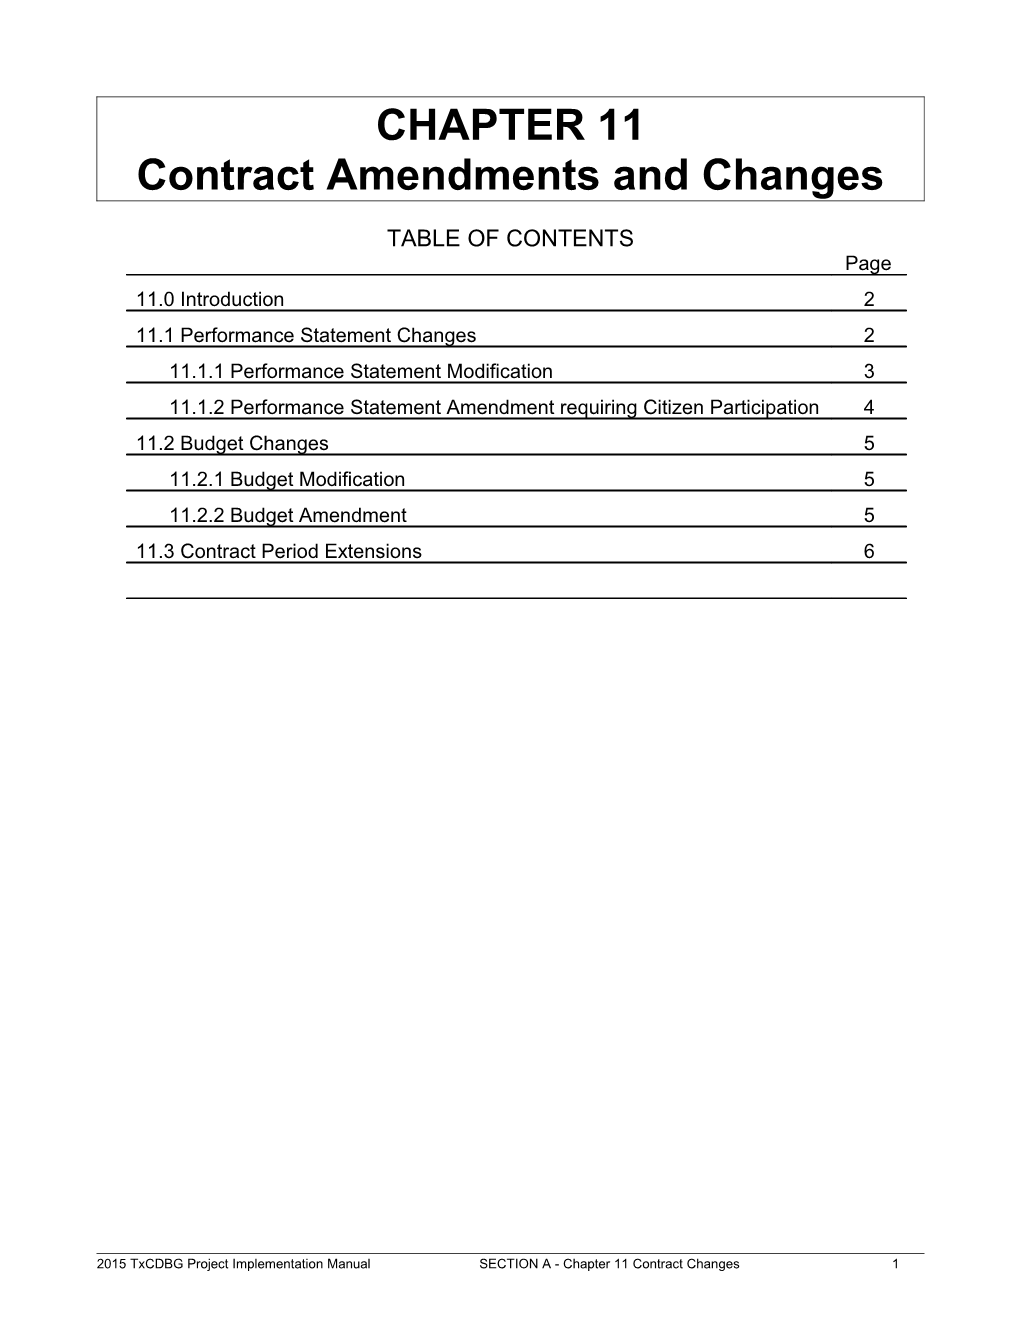 Contract Amendments and Changes